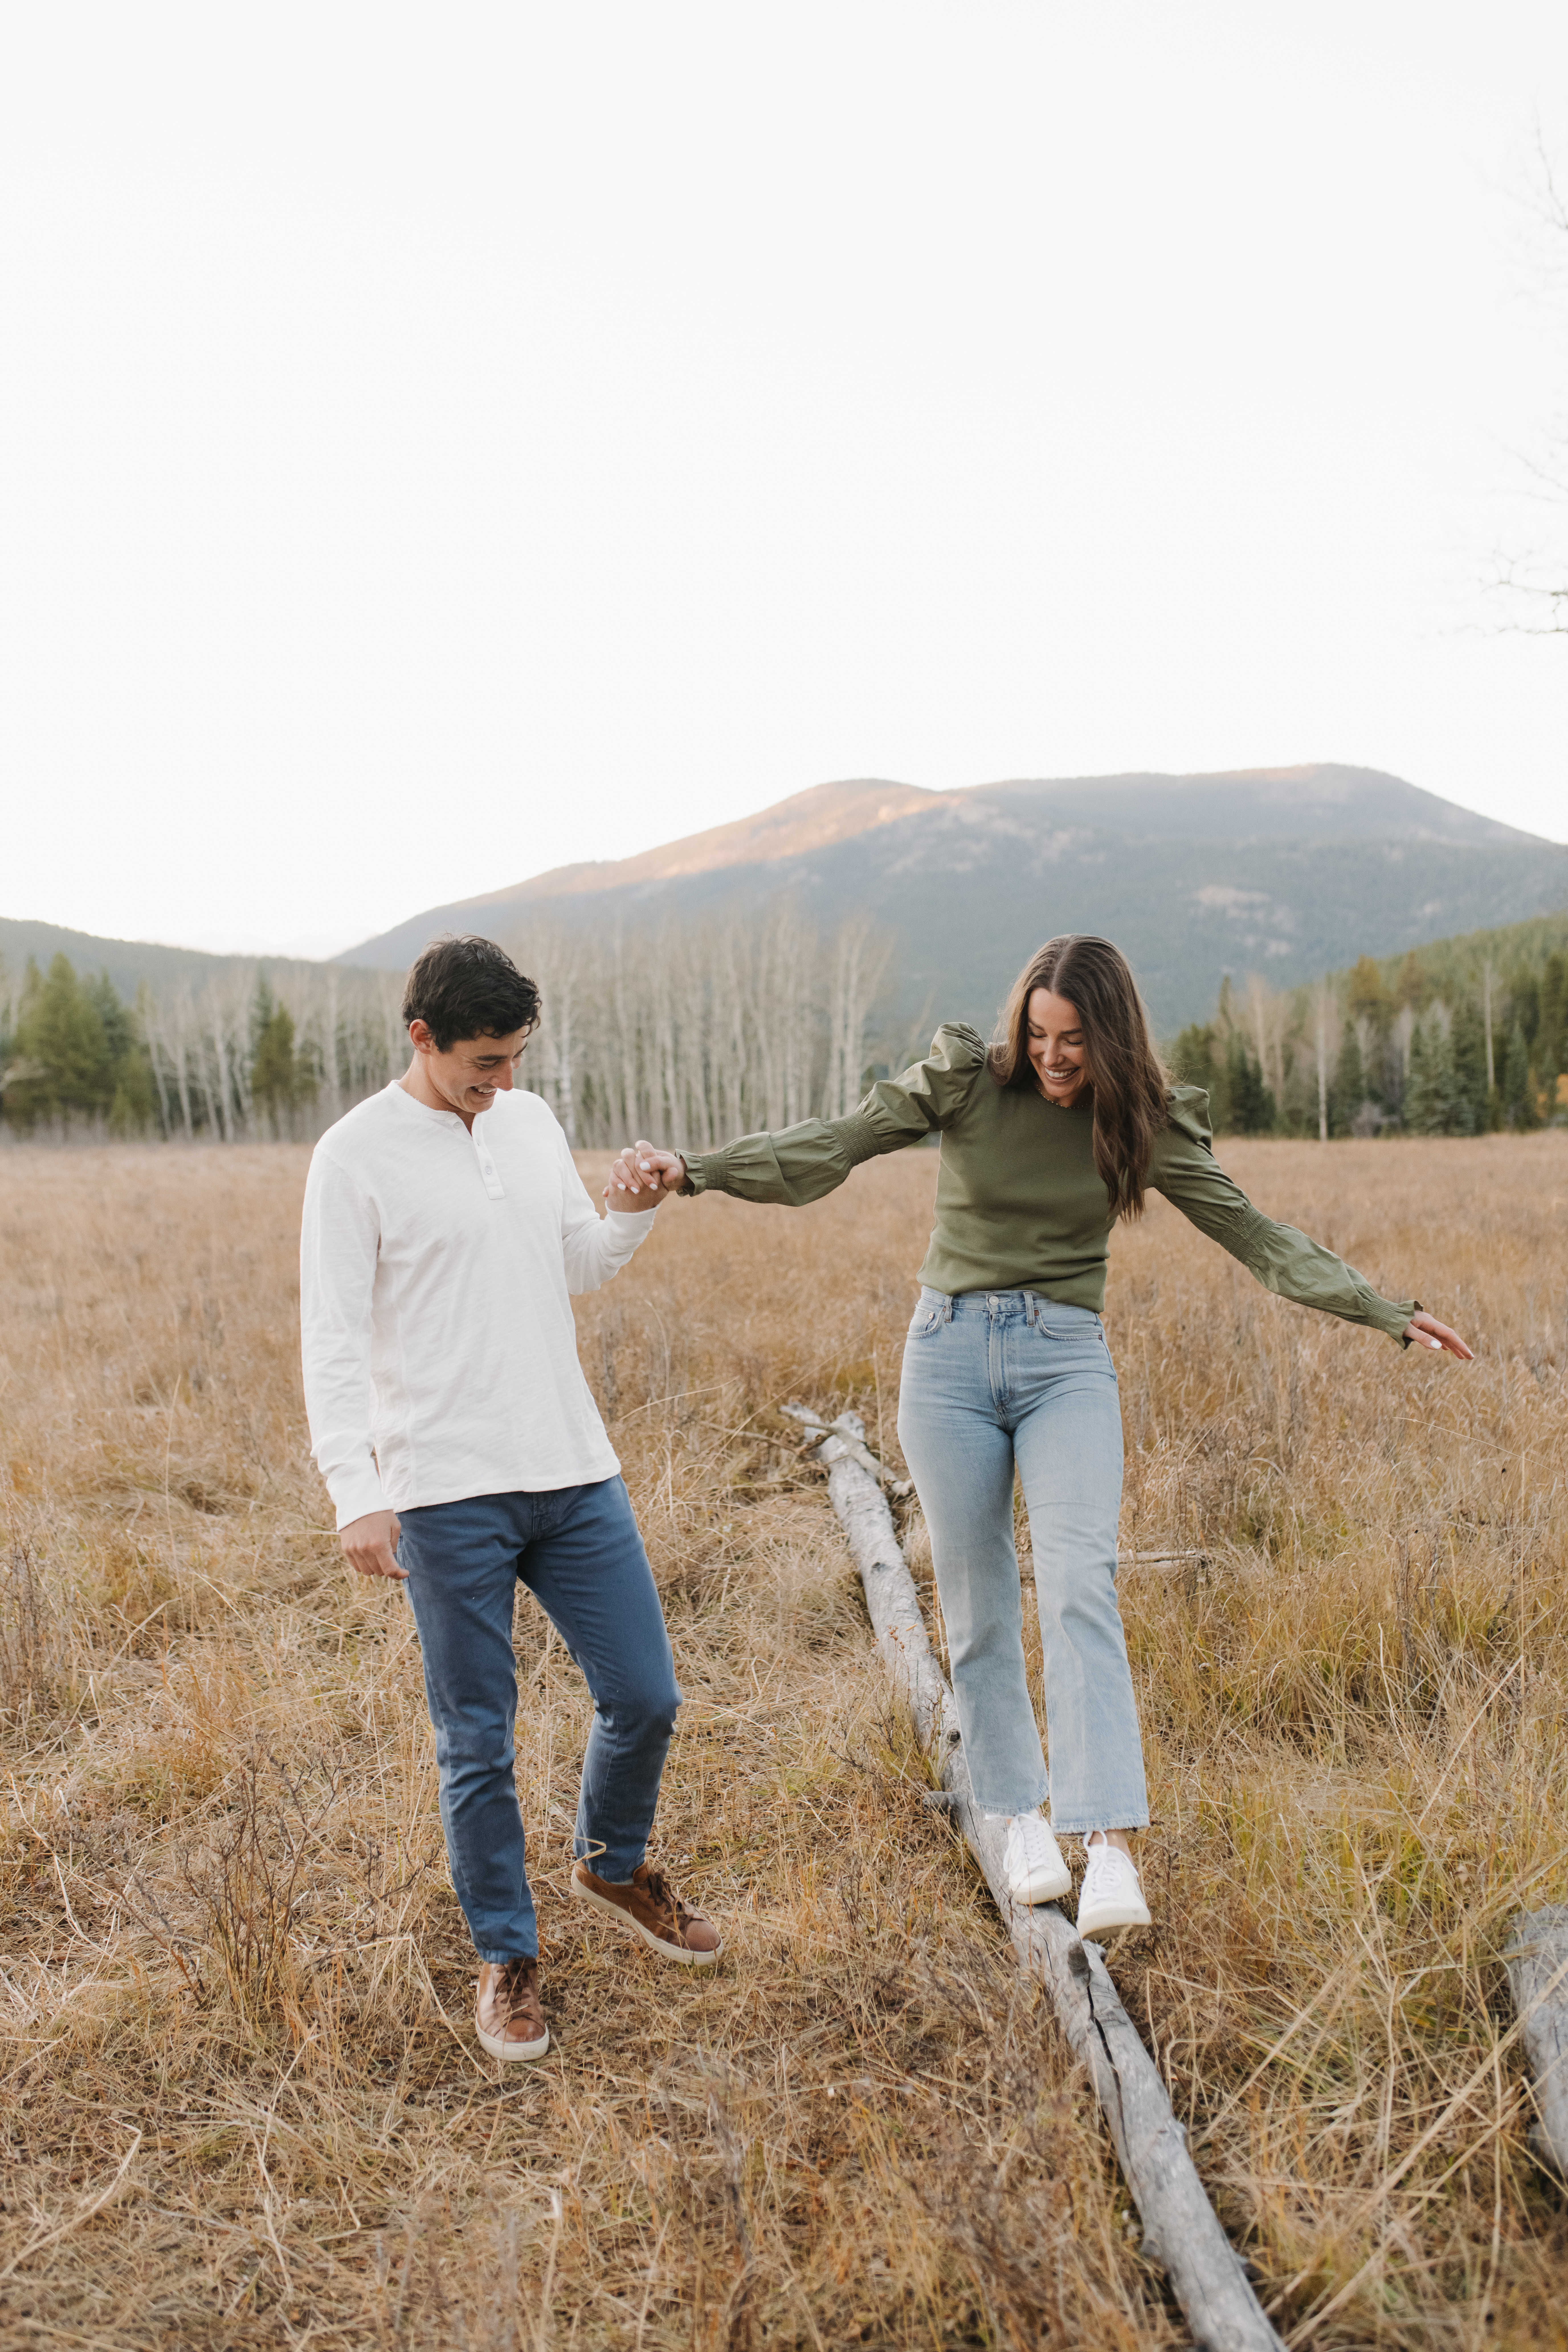 George & Alisa's Colorado Rocky Mountain Engagement Session